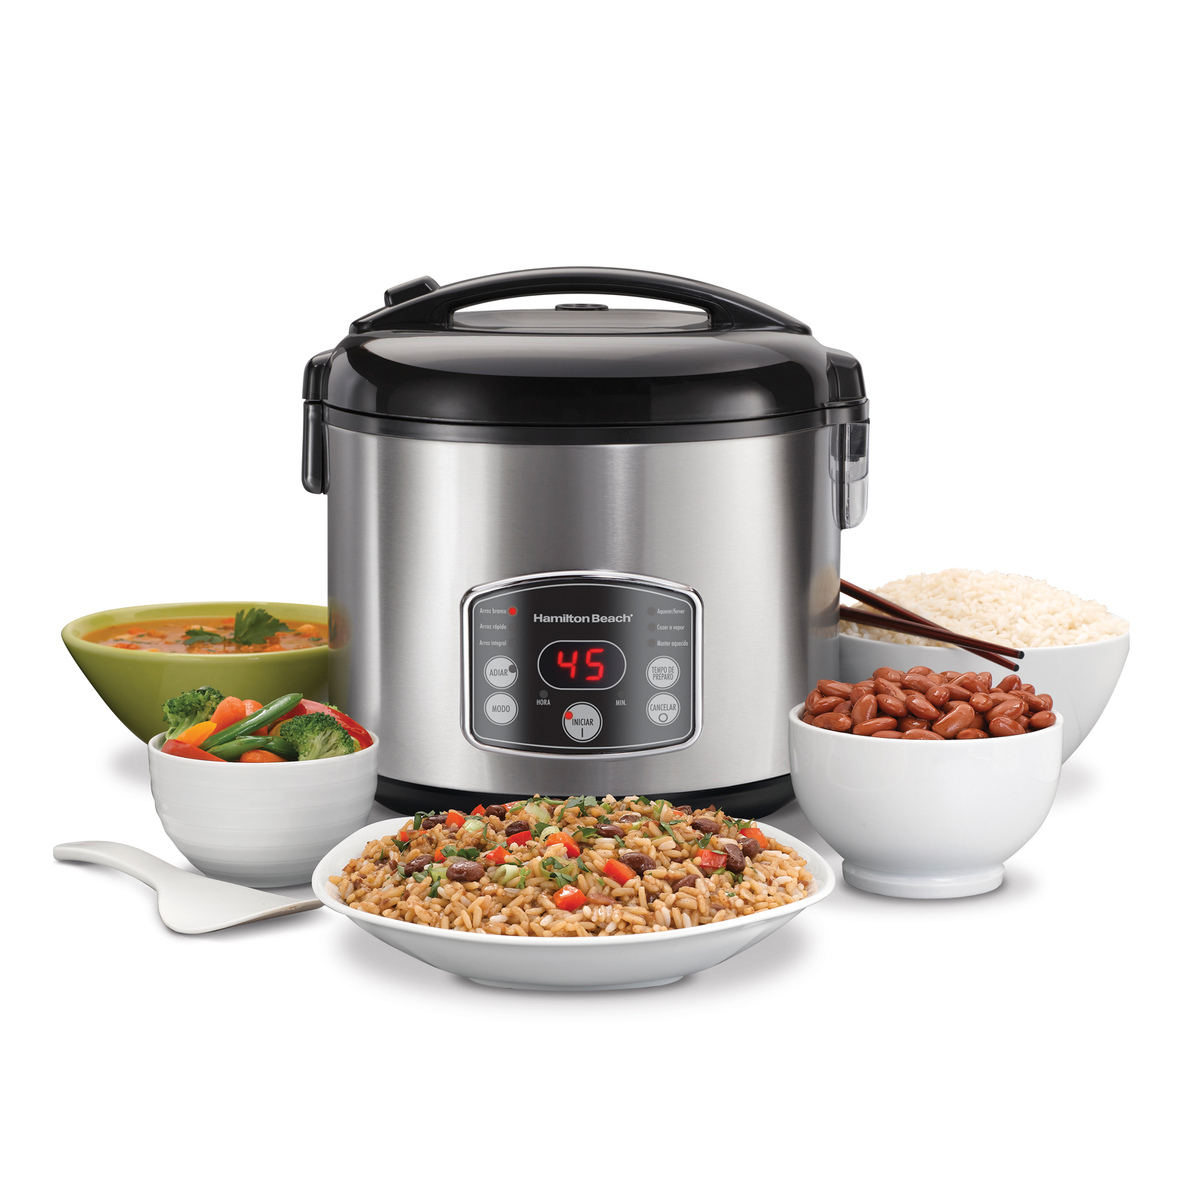 Hamilton Beach Digital Electric Food Steamer & Rice Cooker for Quick,  Healthy Cooking for Vegetables and Seafood, Stackable Two-Tier Bowls, 5.5  Quart